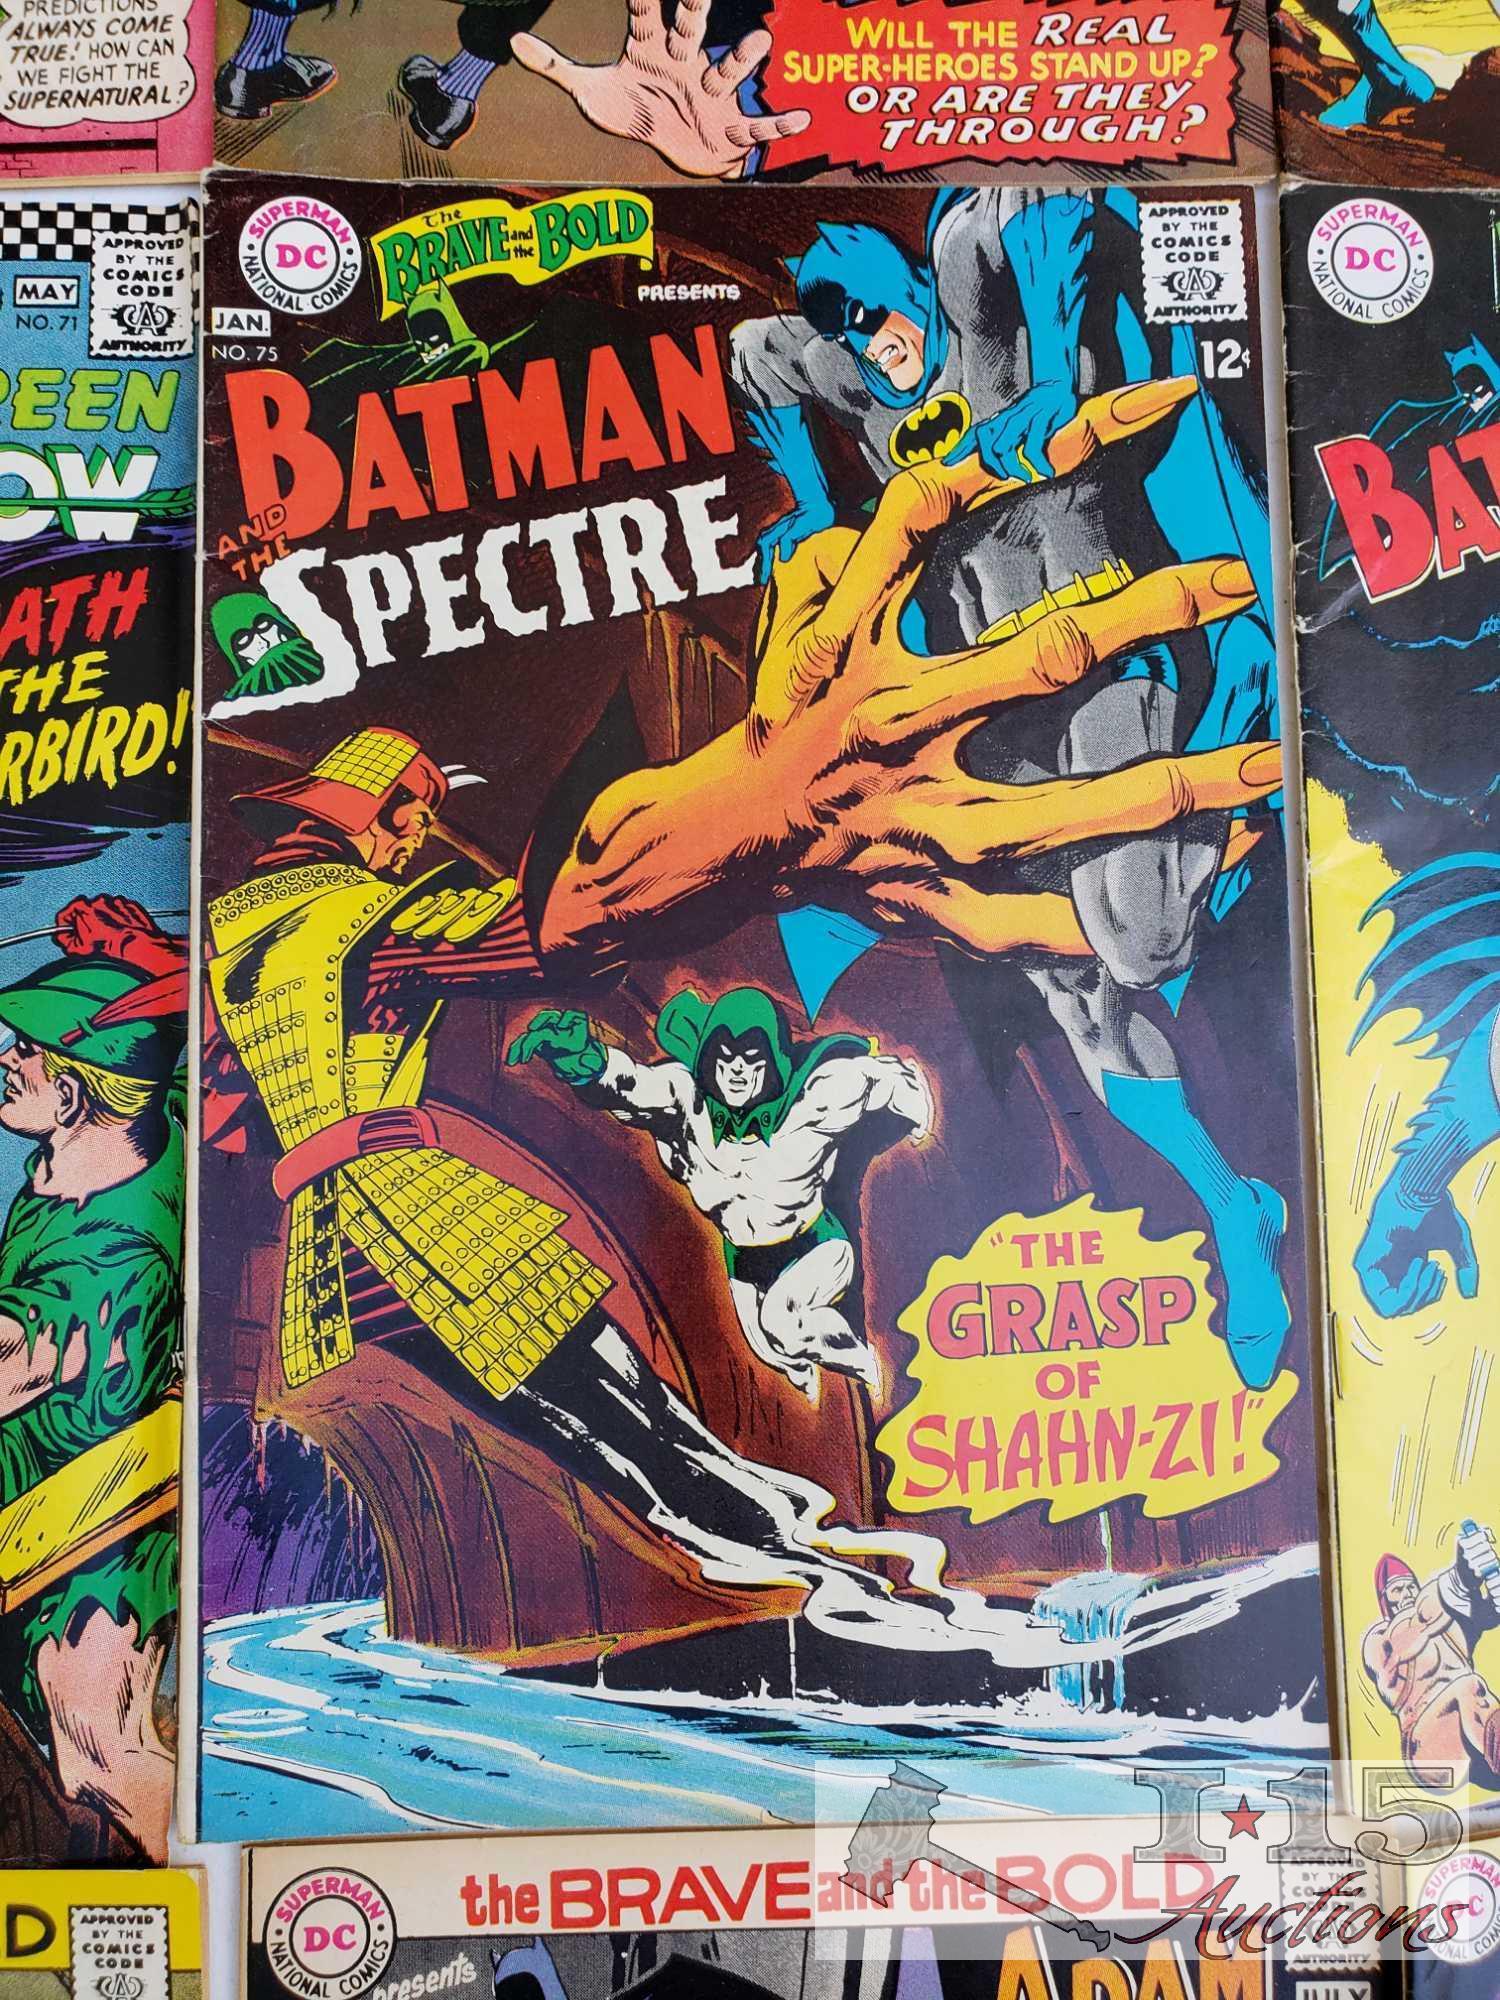 22 DC Comic Books, Worlds Finest, The Brave and Bold, and Detective Comics